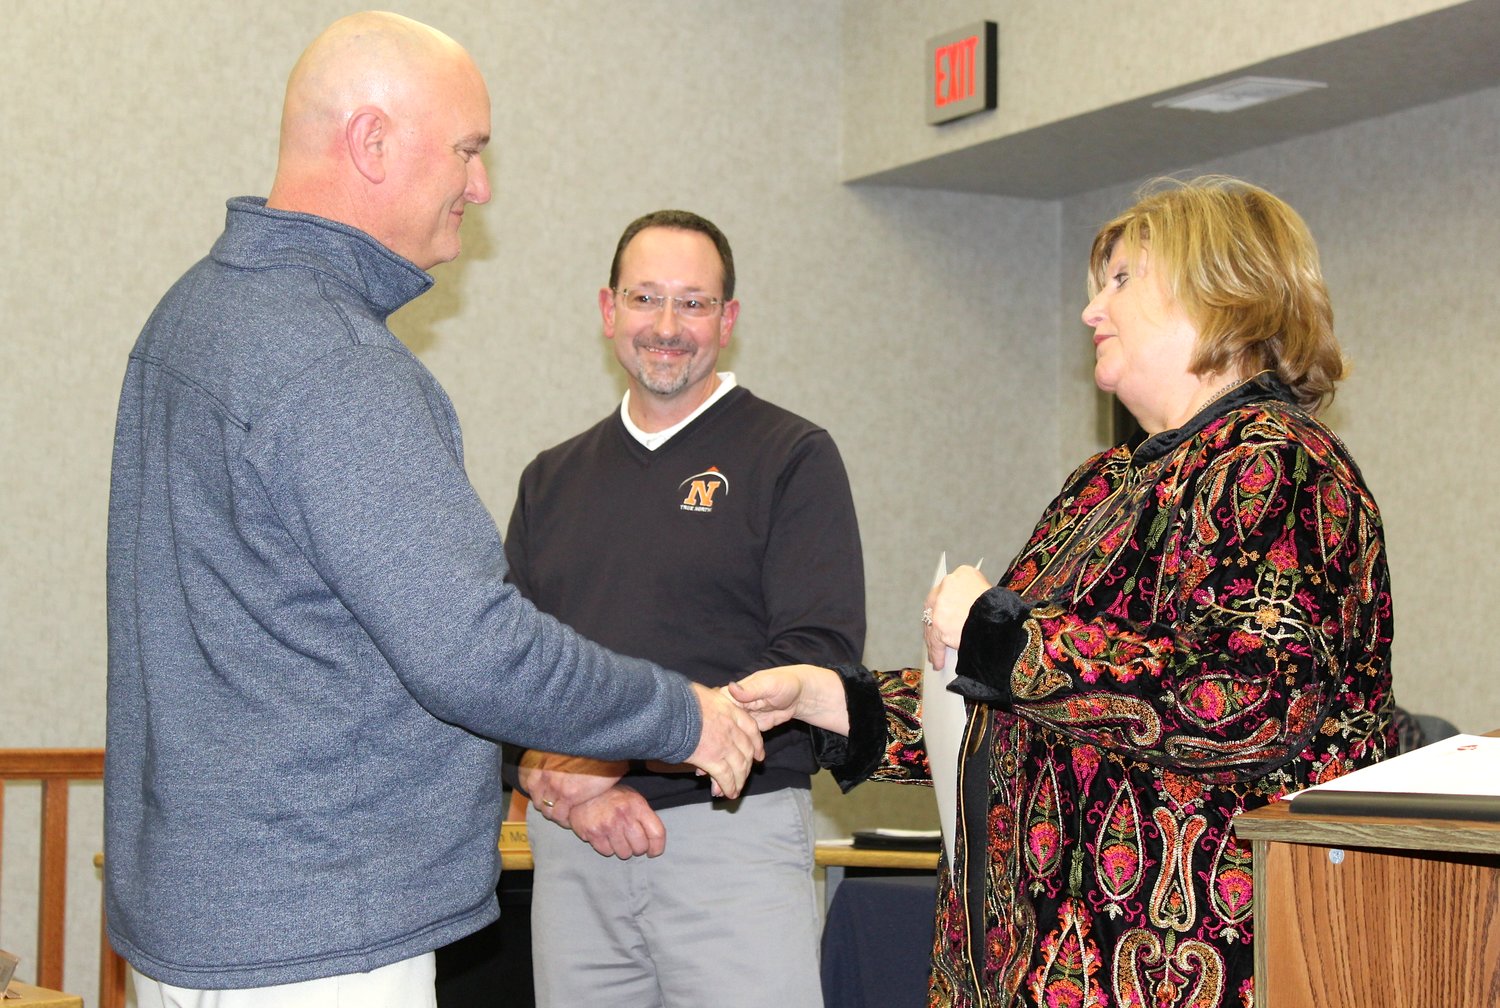 North Montgomery Athletic Director Matt Merica, left, receives the Heartsaver Hero Award during North's January public session. Presenting the award on behalf of the American Heart Association are Superintendent Dr. Colleen Moran, right, and school board President Gary Bohlander.